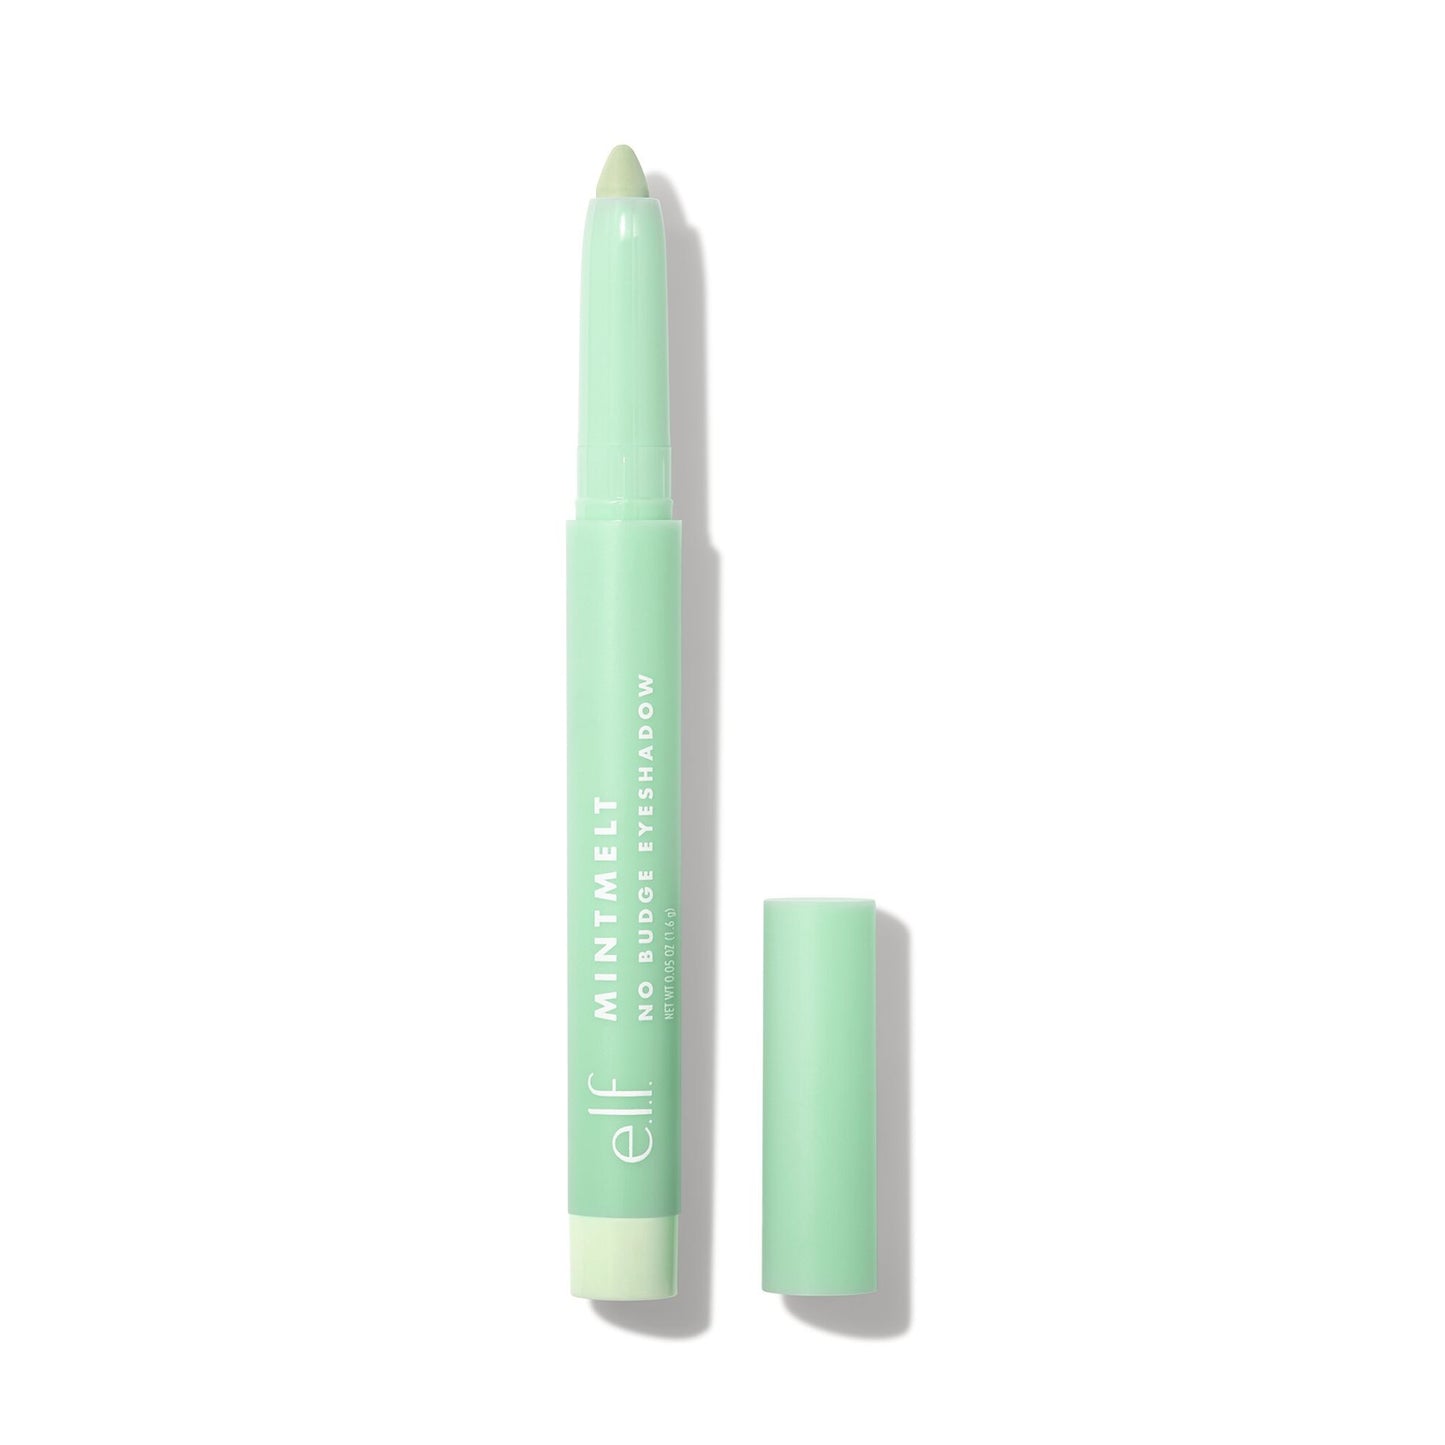 E.L.F Mint Melt No Budge Eyeshadow Stick - Mint for You Make your eyes the prize—these versatile matte and metallic shadow sticks give you high-pigment, workable color with stay-put power. The creamy formula applies smoothly as an eyeshadow or liner so you can effortlessly create any look, from subtly shimmery or matte to bold and multi-dimensional. The twist-up design offers easy application while the convenient built-in sharpener keeps your precision point sharp. Available in 3 chocolaty mint shades.